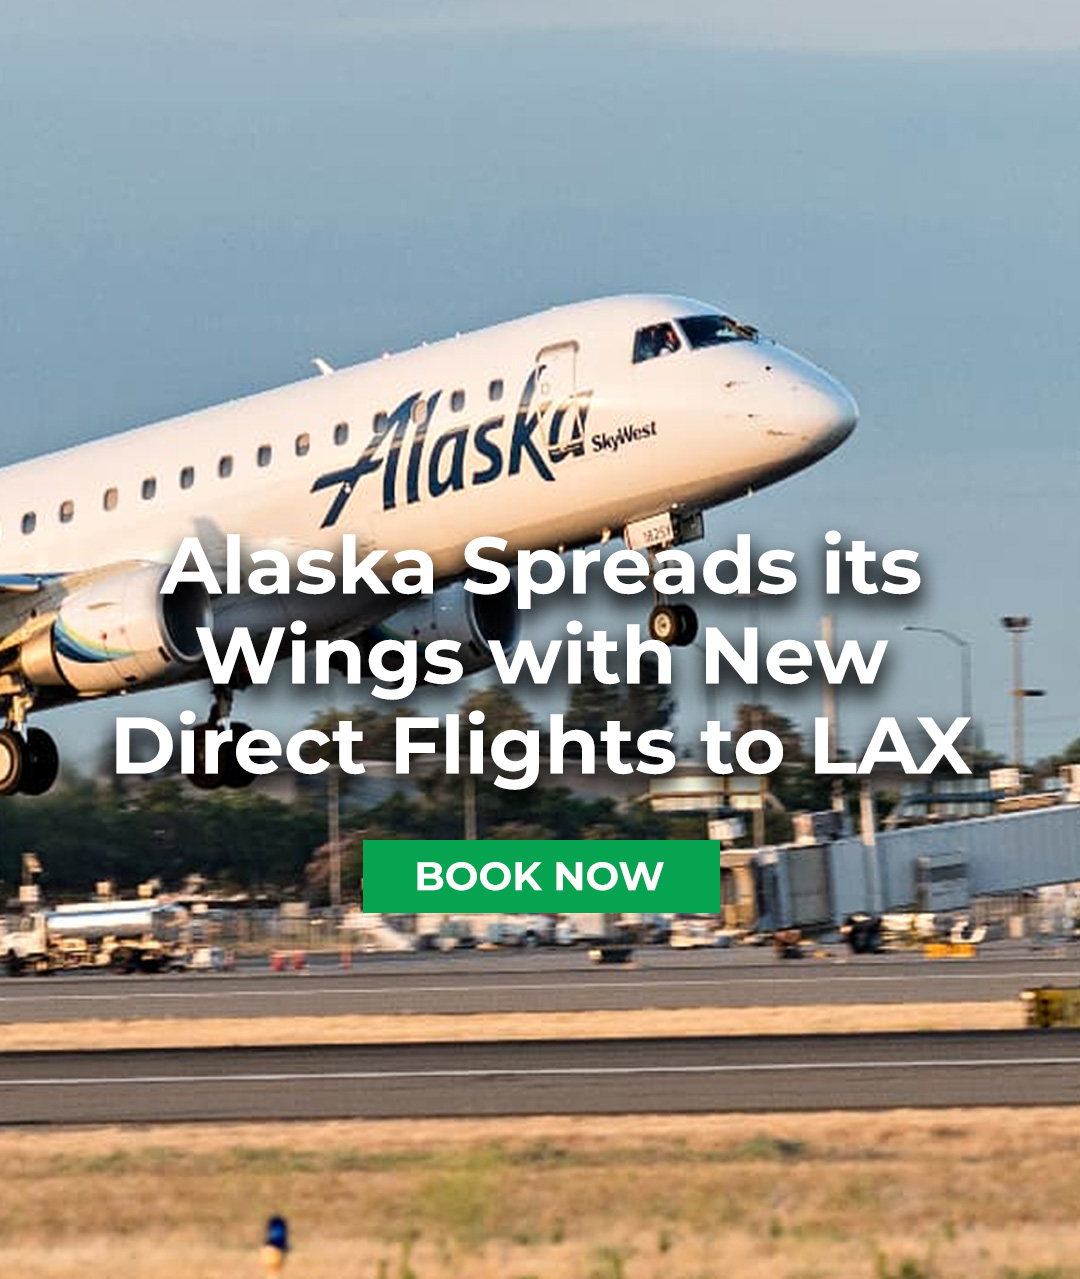 Alaska Airlines Direct Flight to LAX verticle